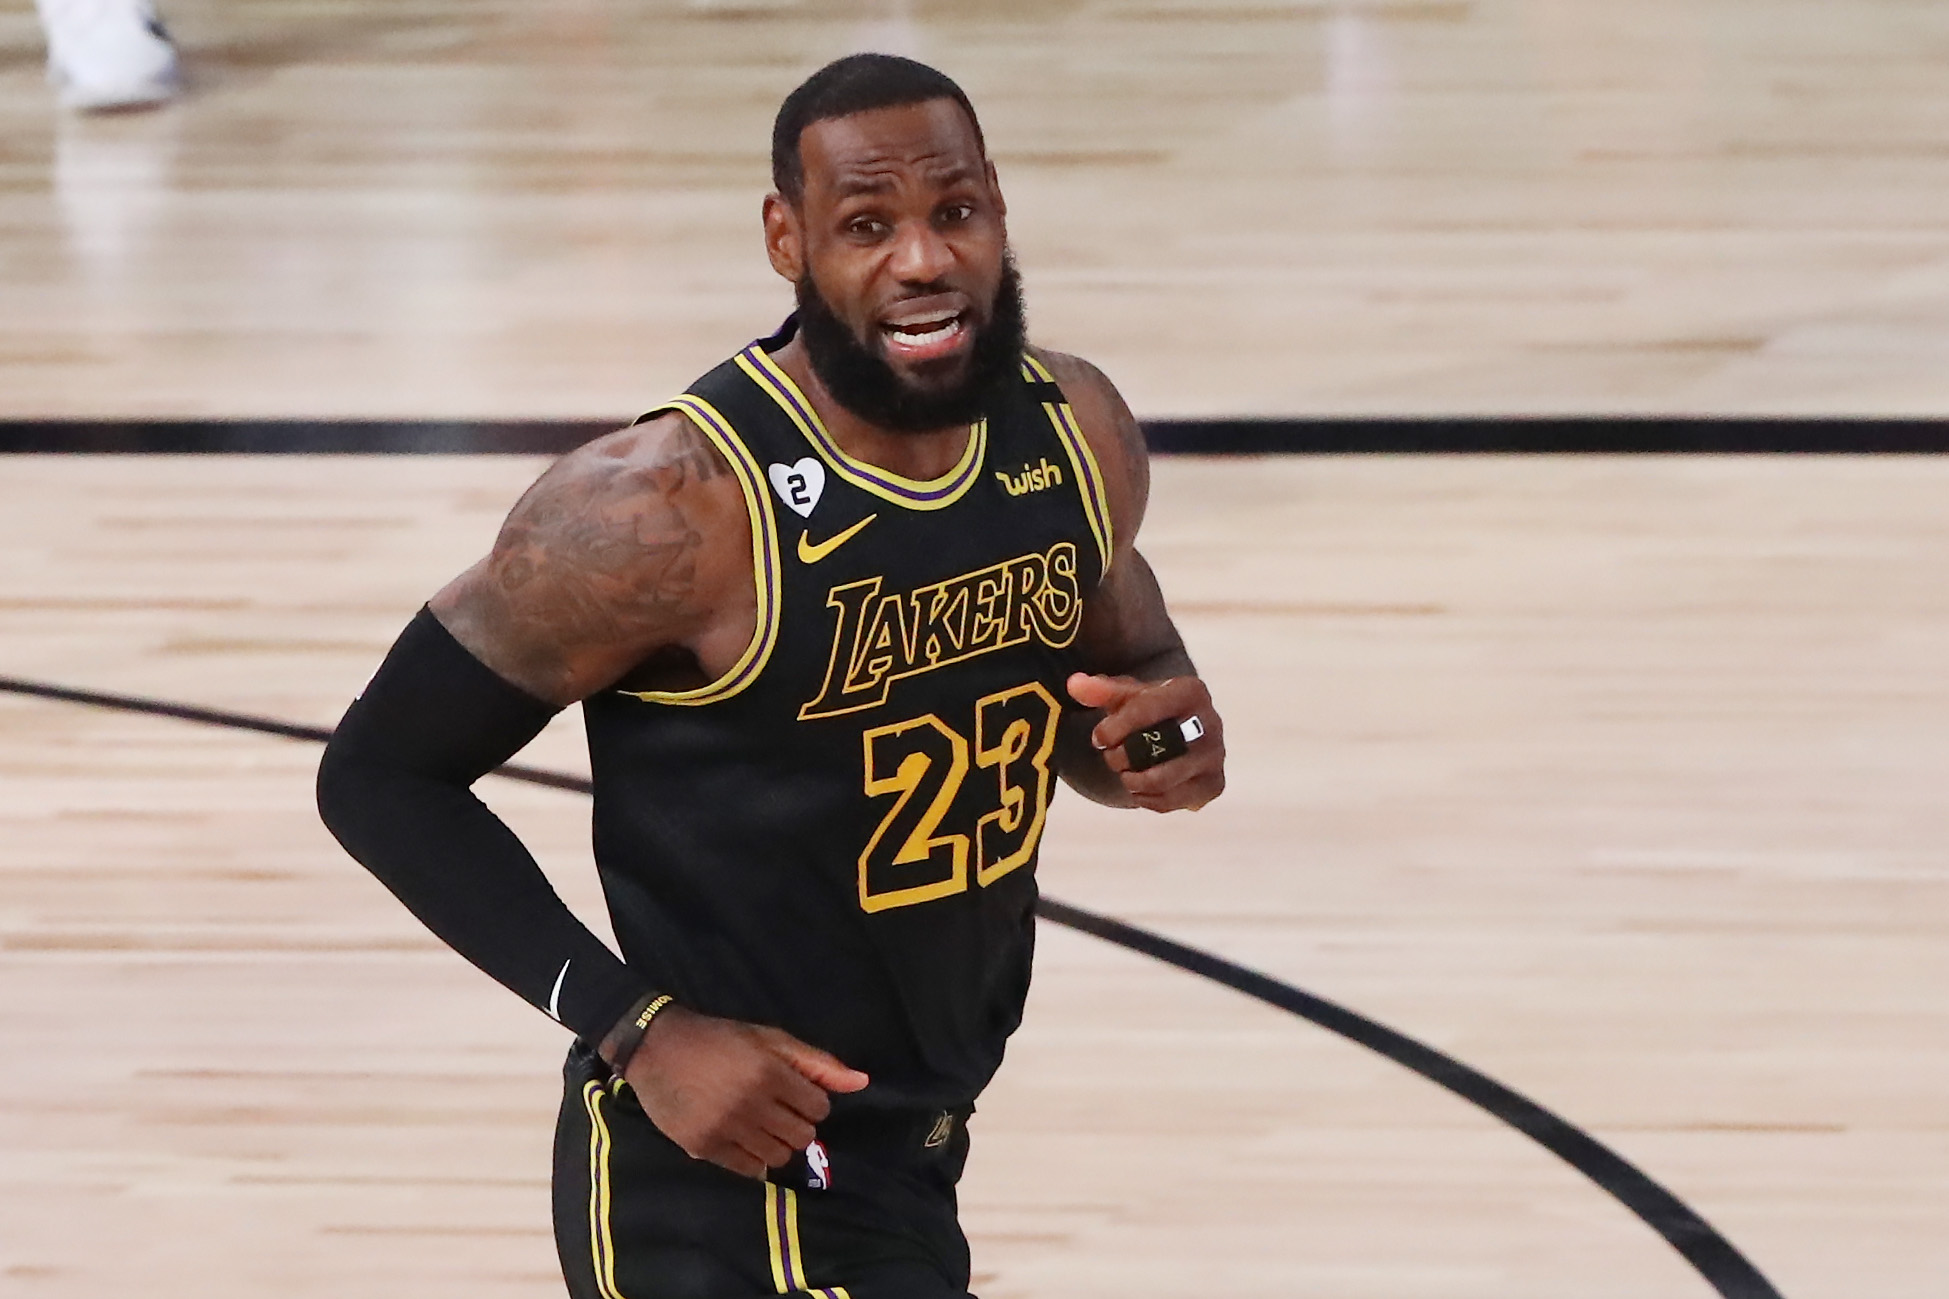 Lakers win recordtying 17th NBA title, giving LeBron James his 4th